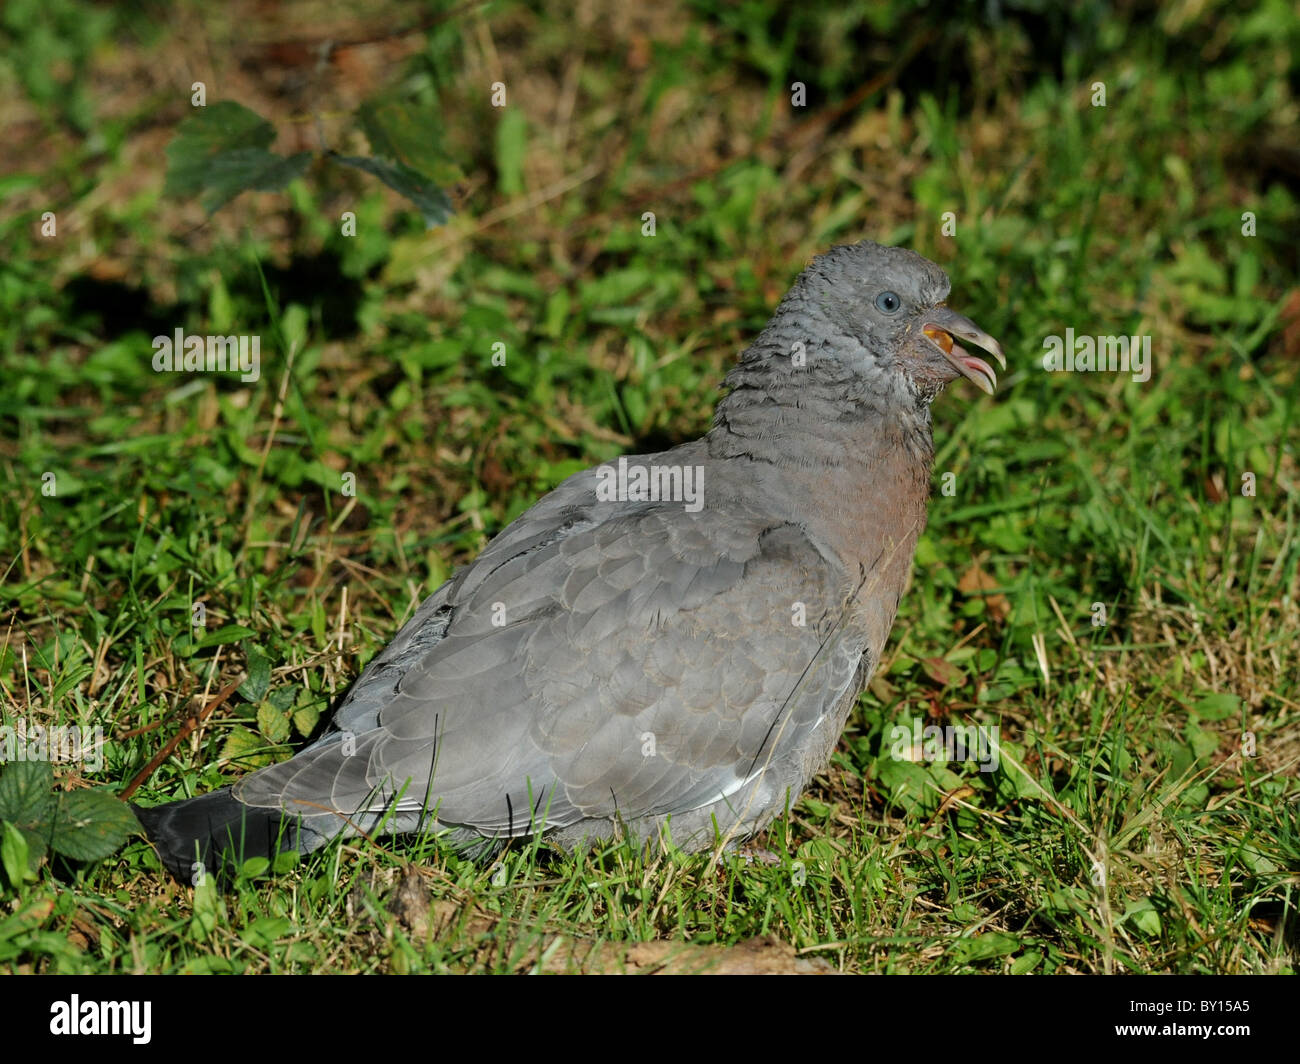 A very old pigeon resting on some grass. Stock Photo